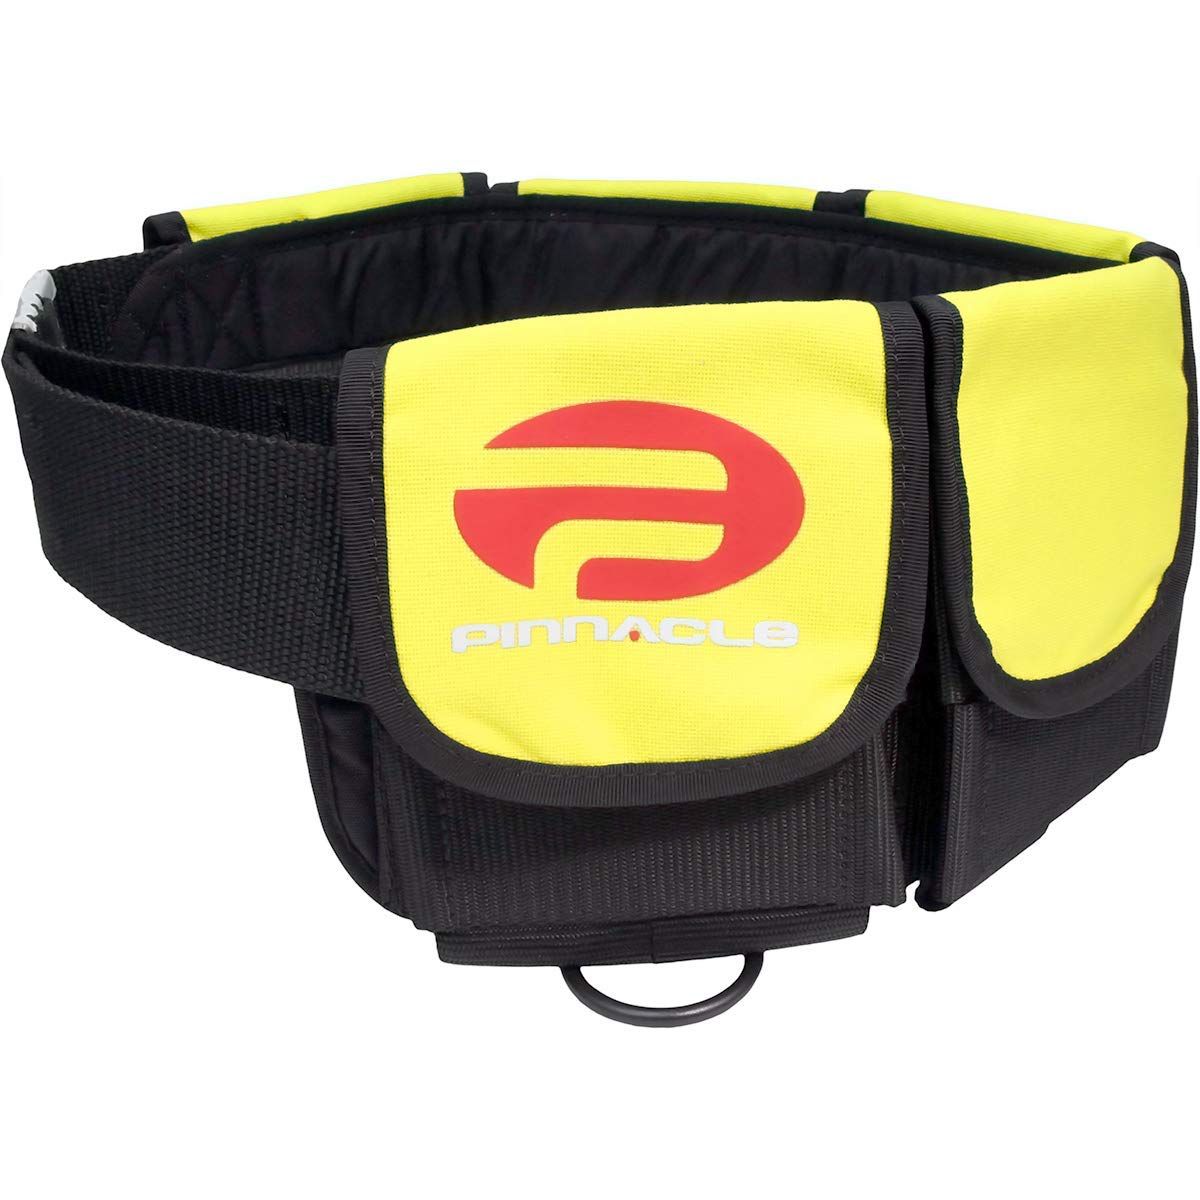 Pinnacle Weight Belt with Stainless Steel Buckle 